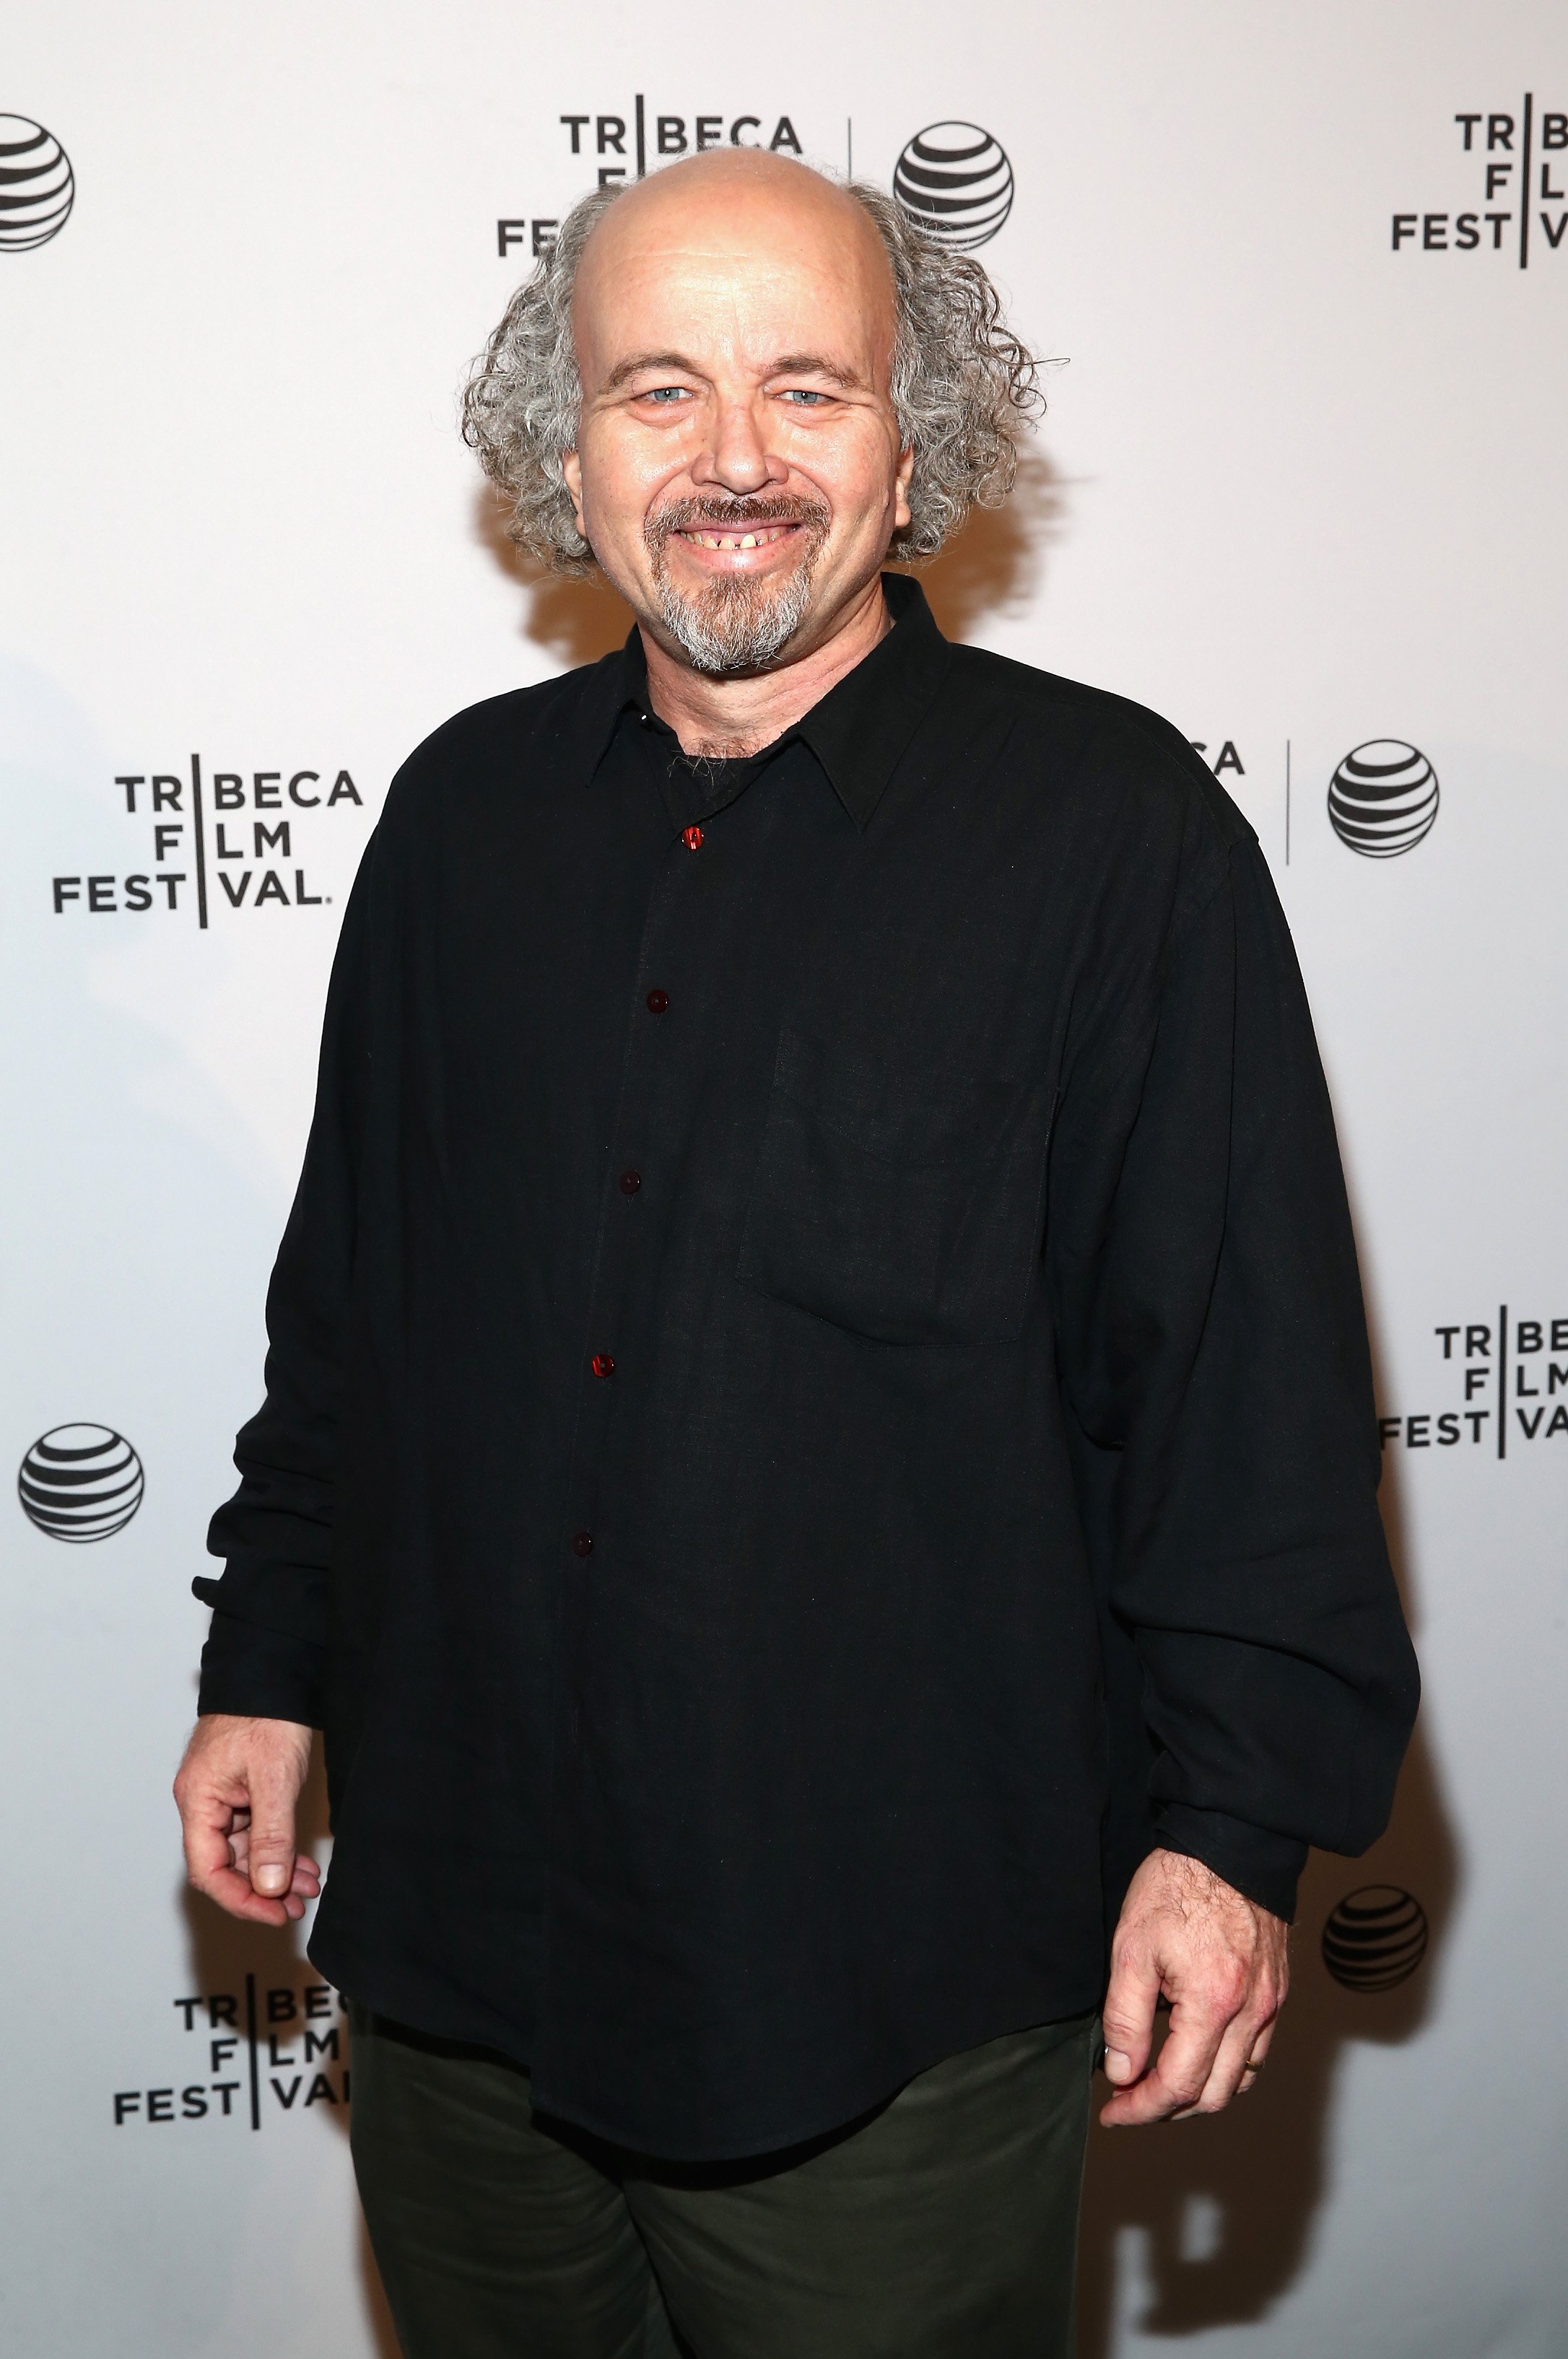 Clint Howard at the premiere of "Intramural" during the 2014 Tribeca Film Festival | Photo: Getty Images